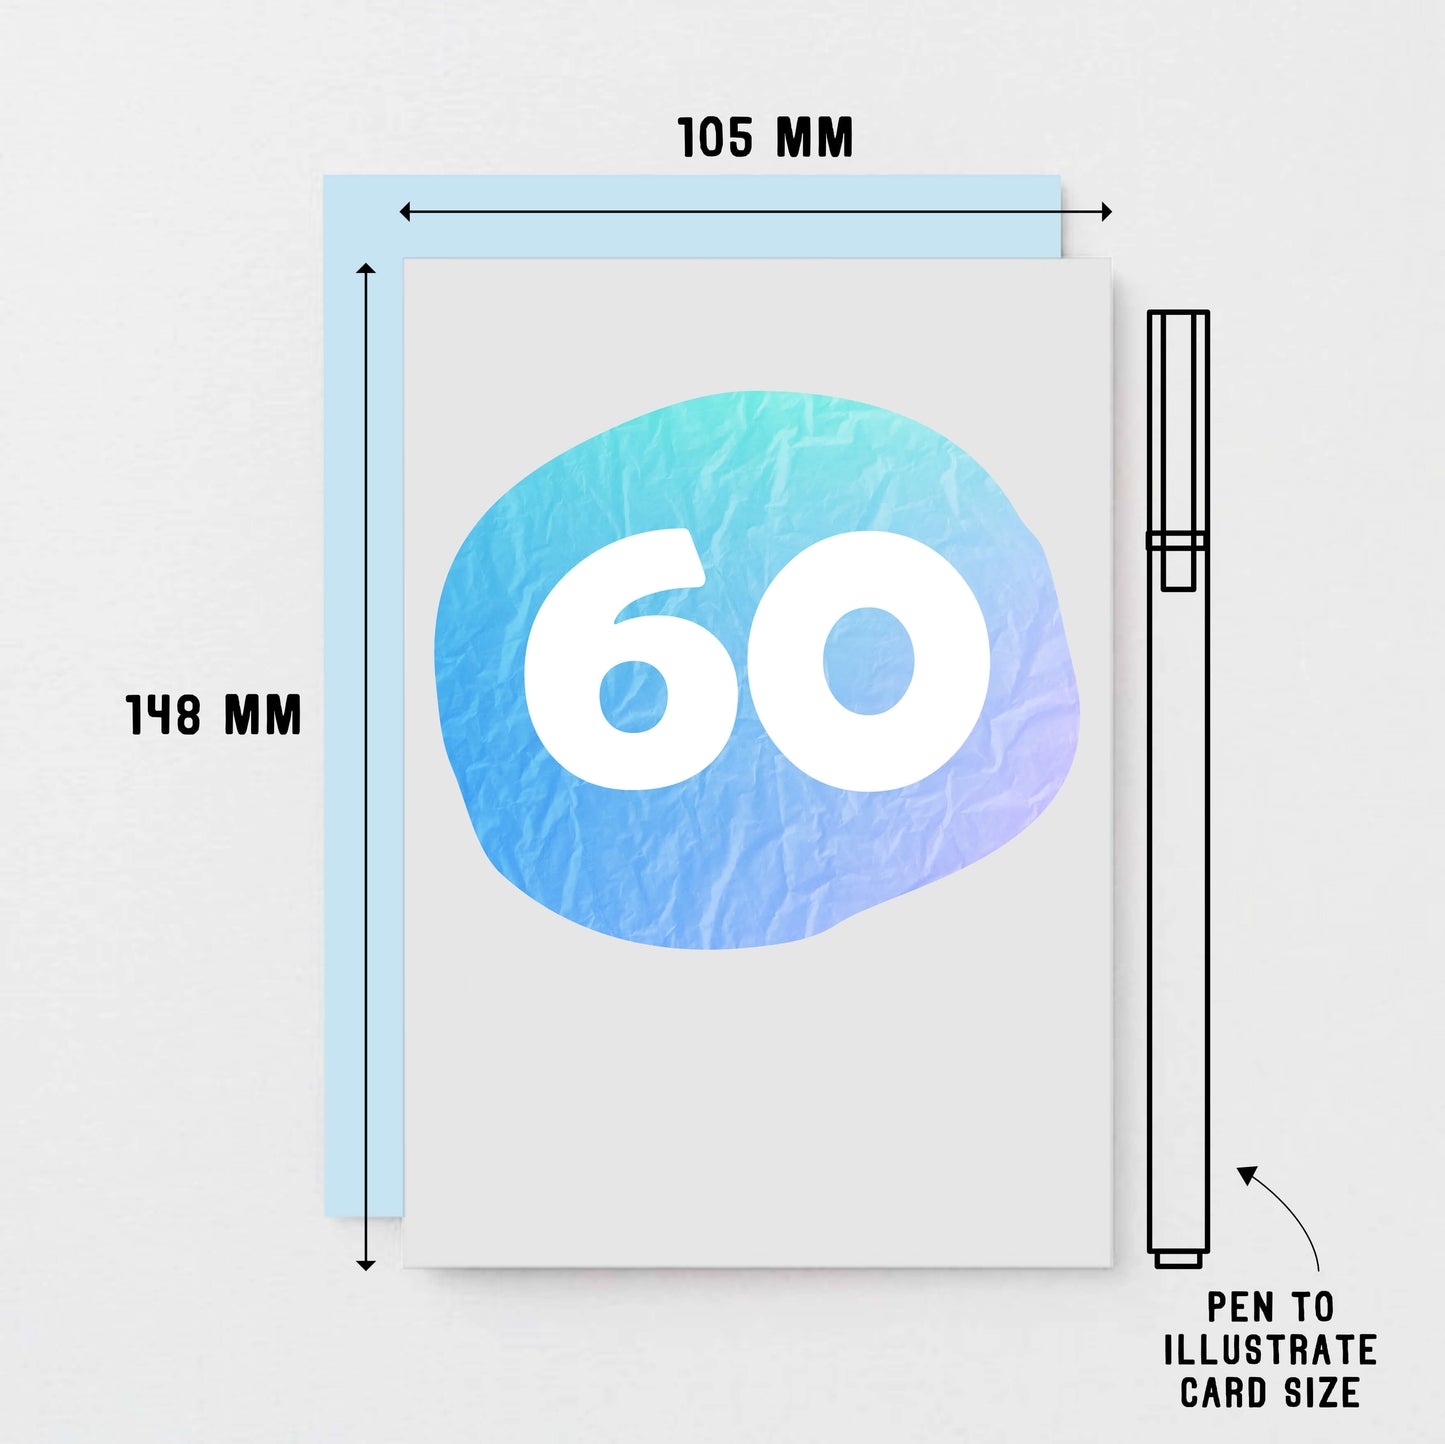 60 Years Card by SixElevenCreations. Product Code SE4058A6